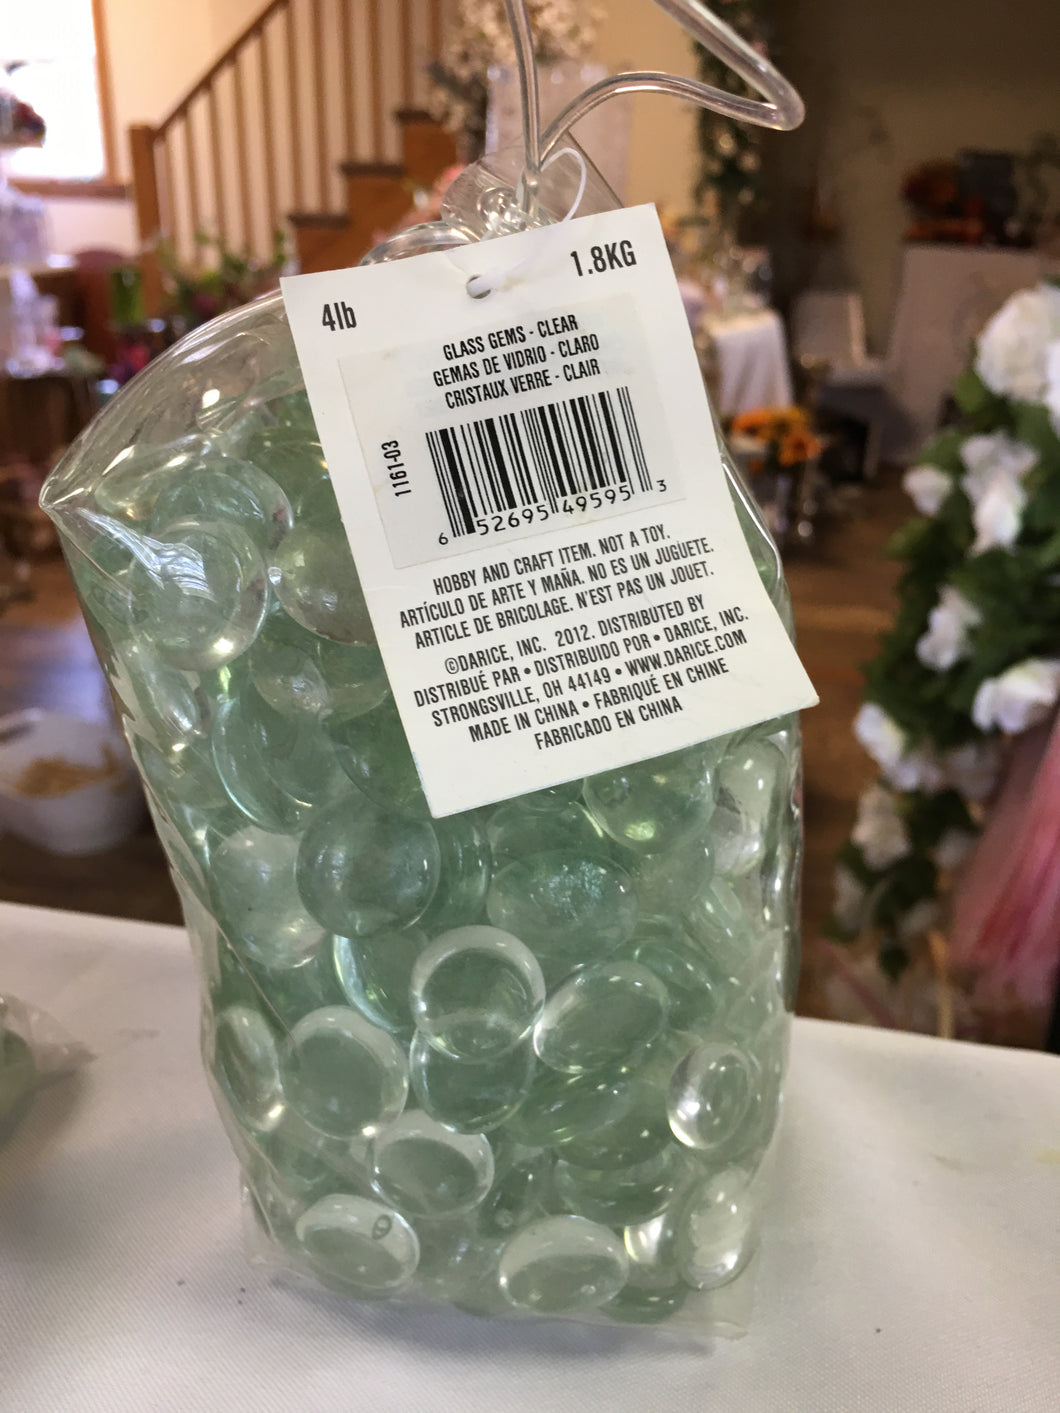 SMIT300-AI. 4Lb Bag of Clear Glass Gems, New